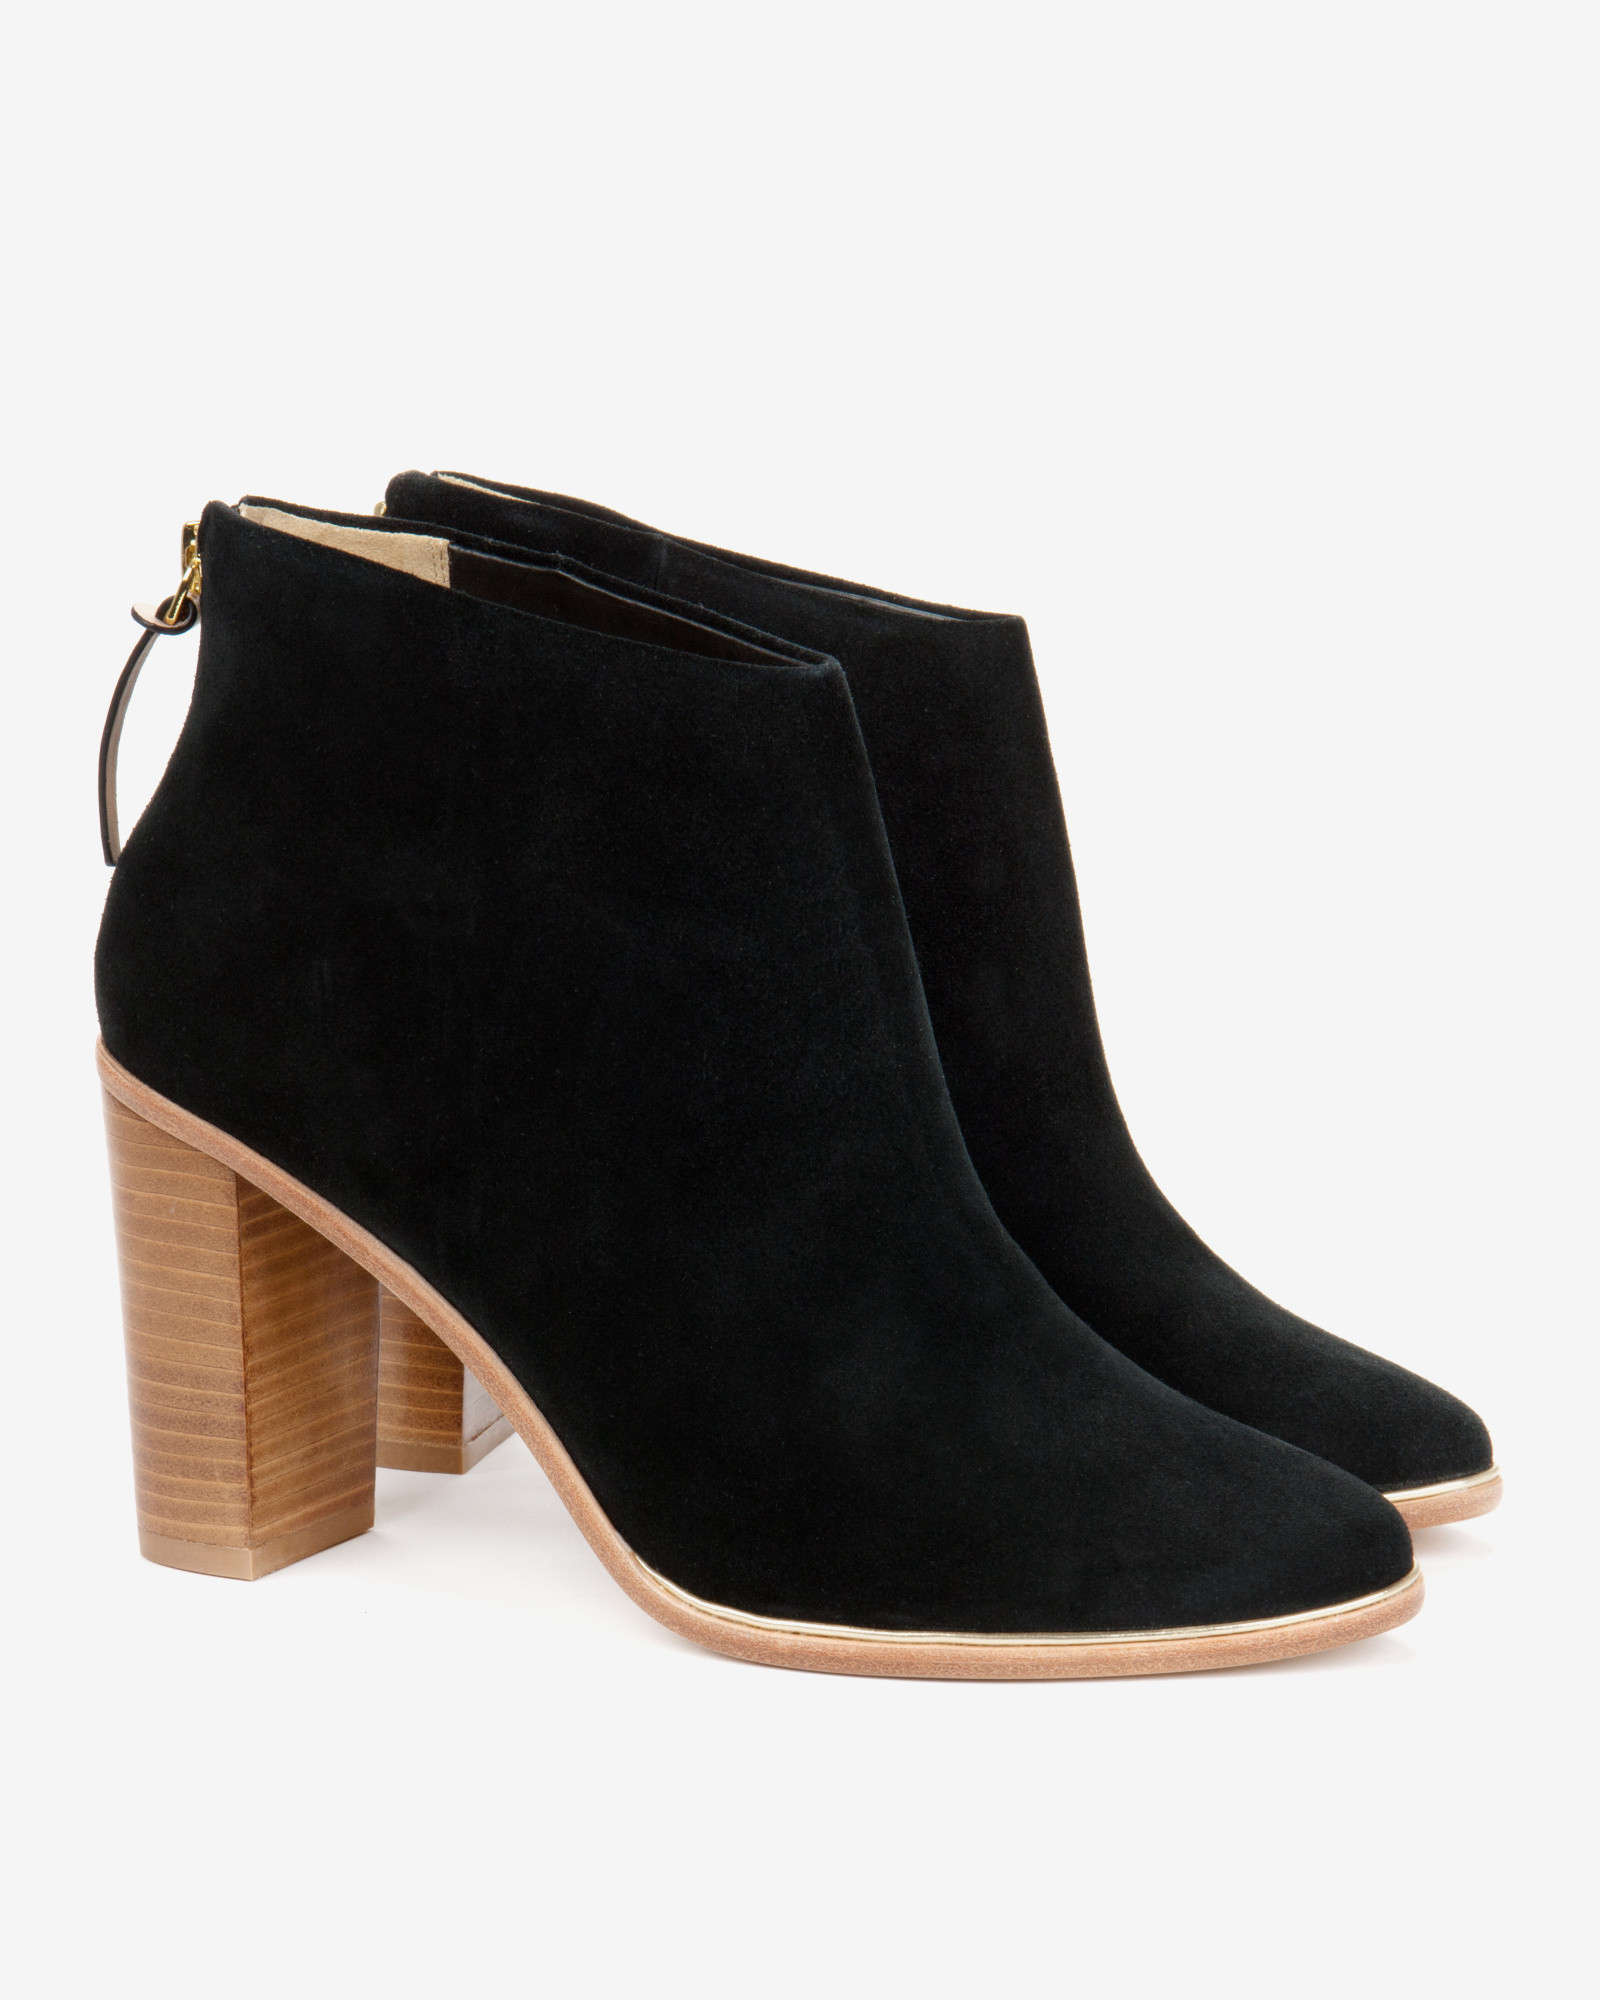 ted-baker-black-leather-heeled-ankle-boots-product-1-27722833-2-653080772-normal.jpg